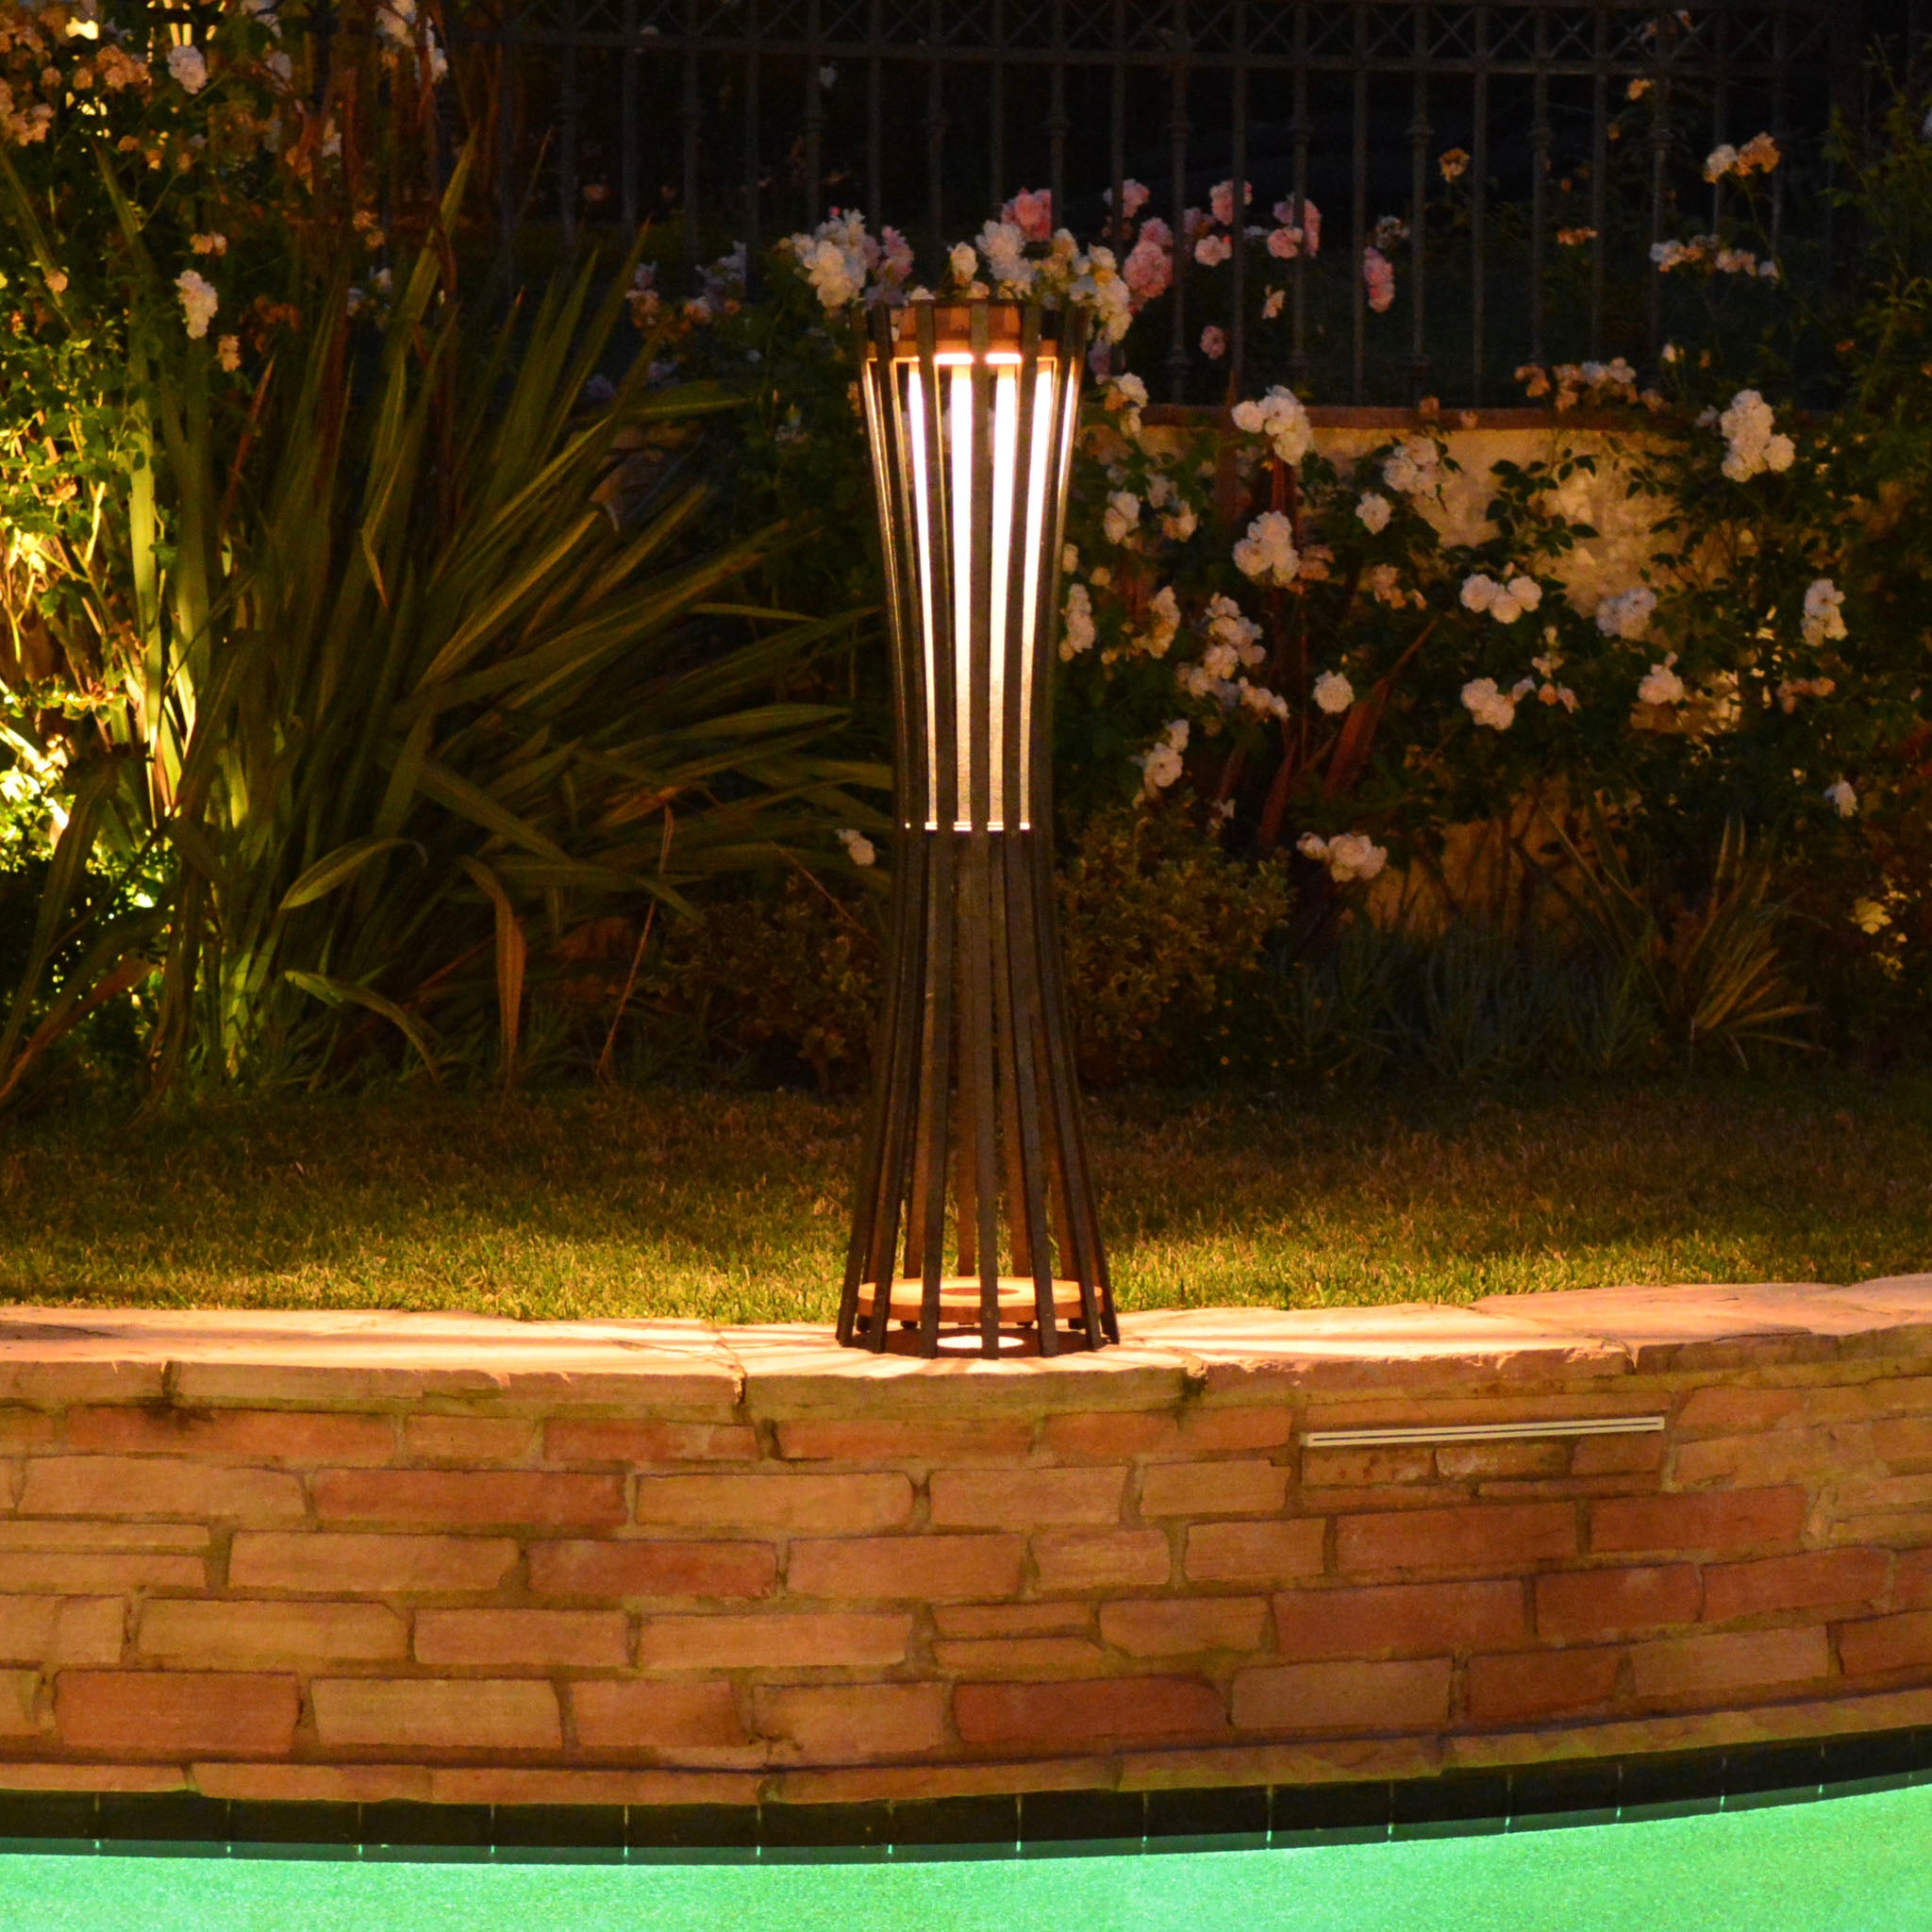 photo of corsetta solar lamp lighting outdoor garden and pool surrounding flowers and plants